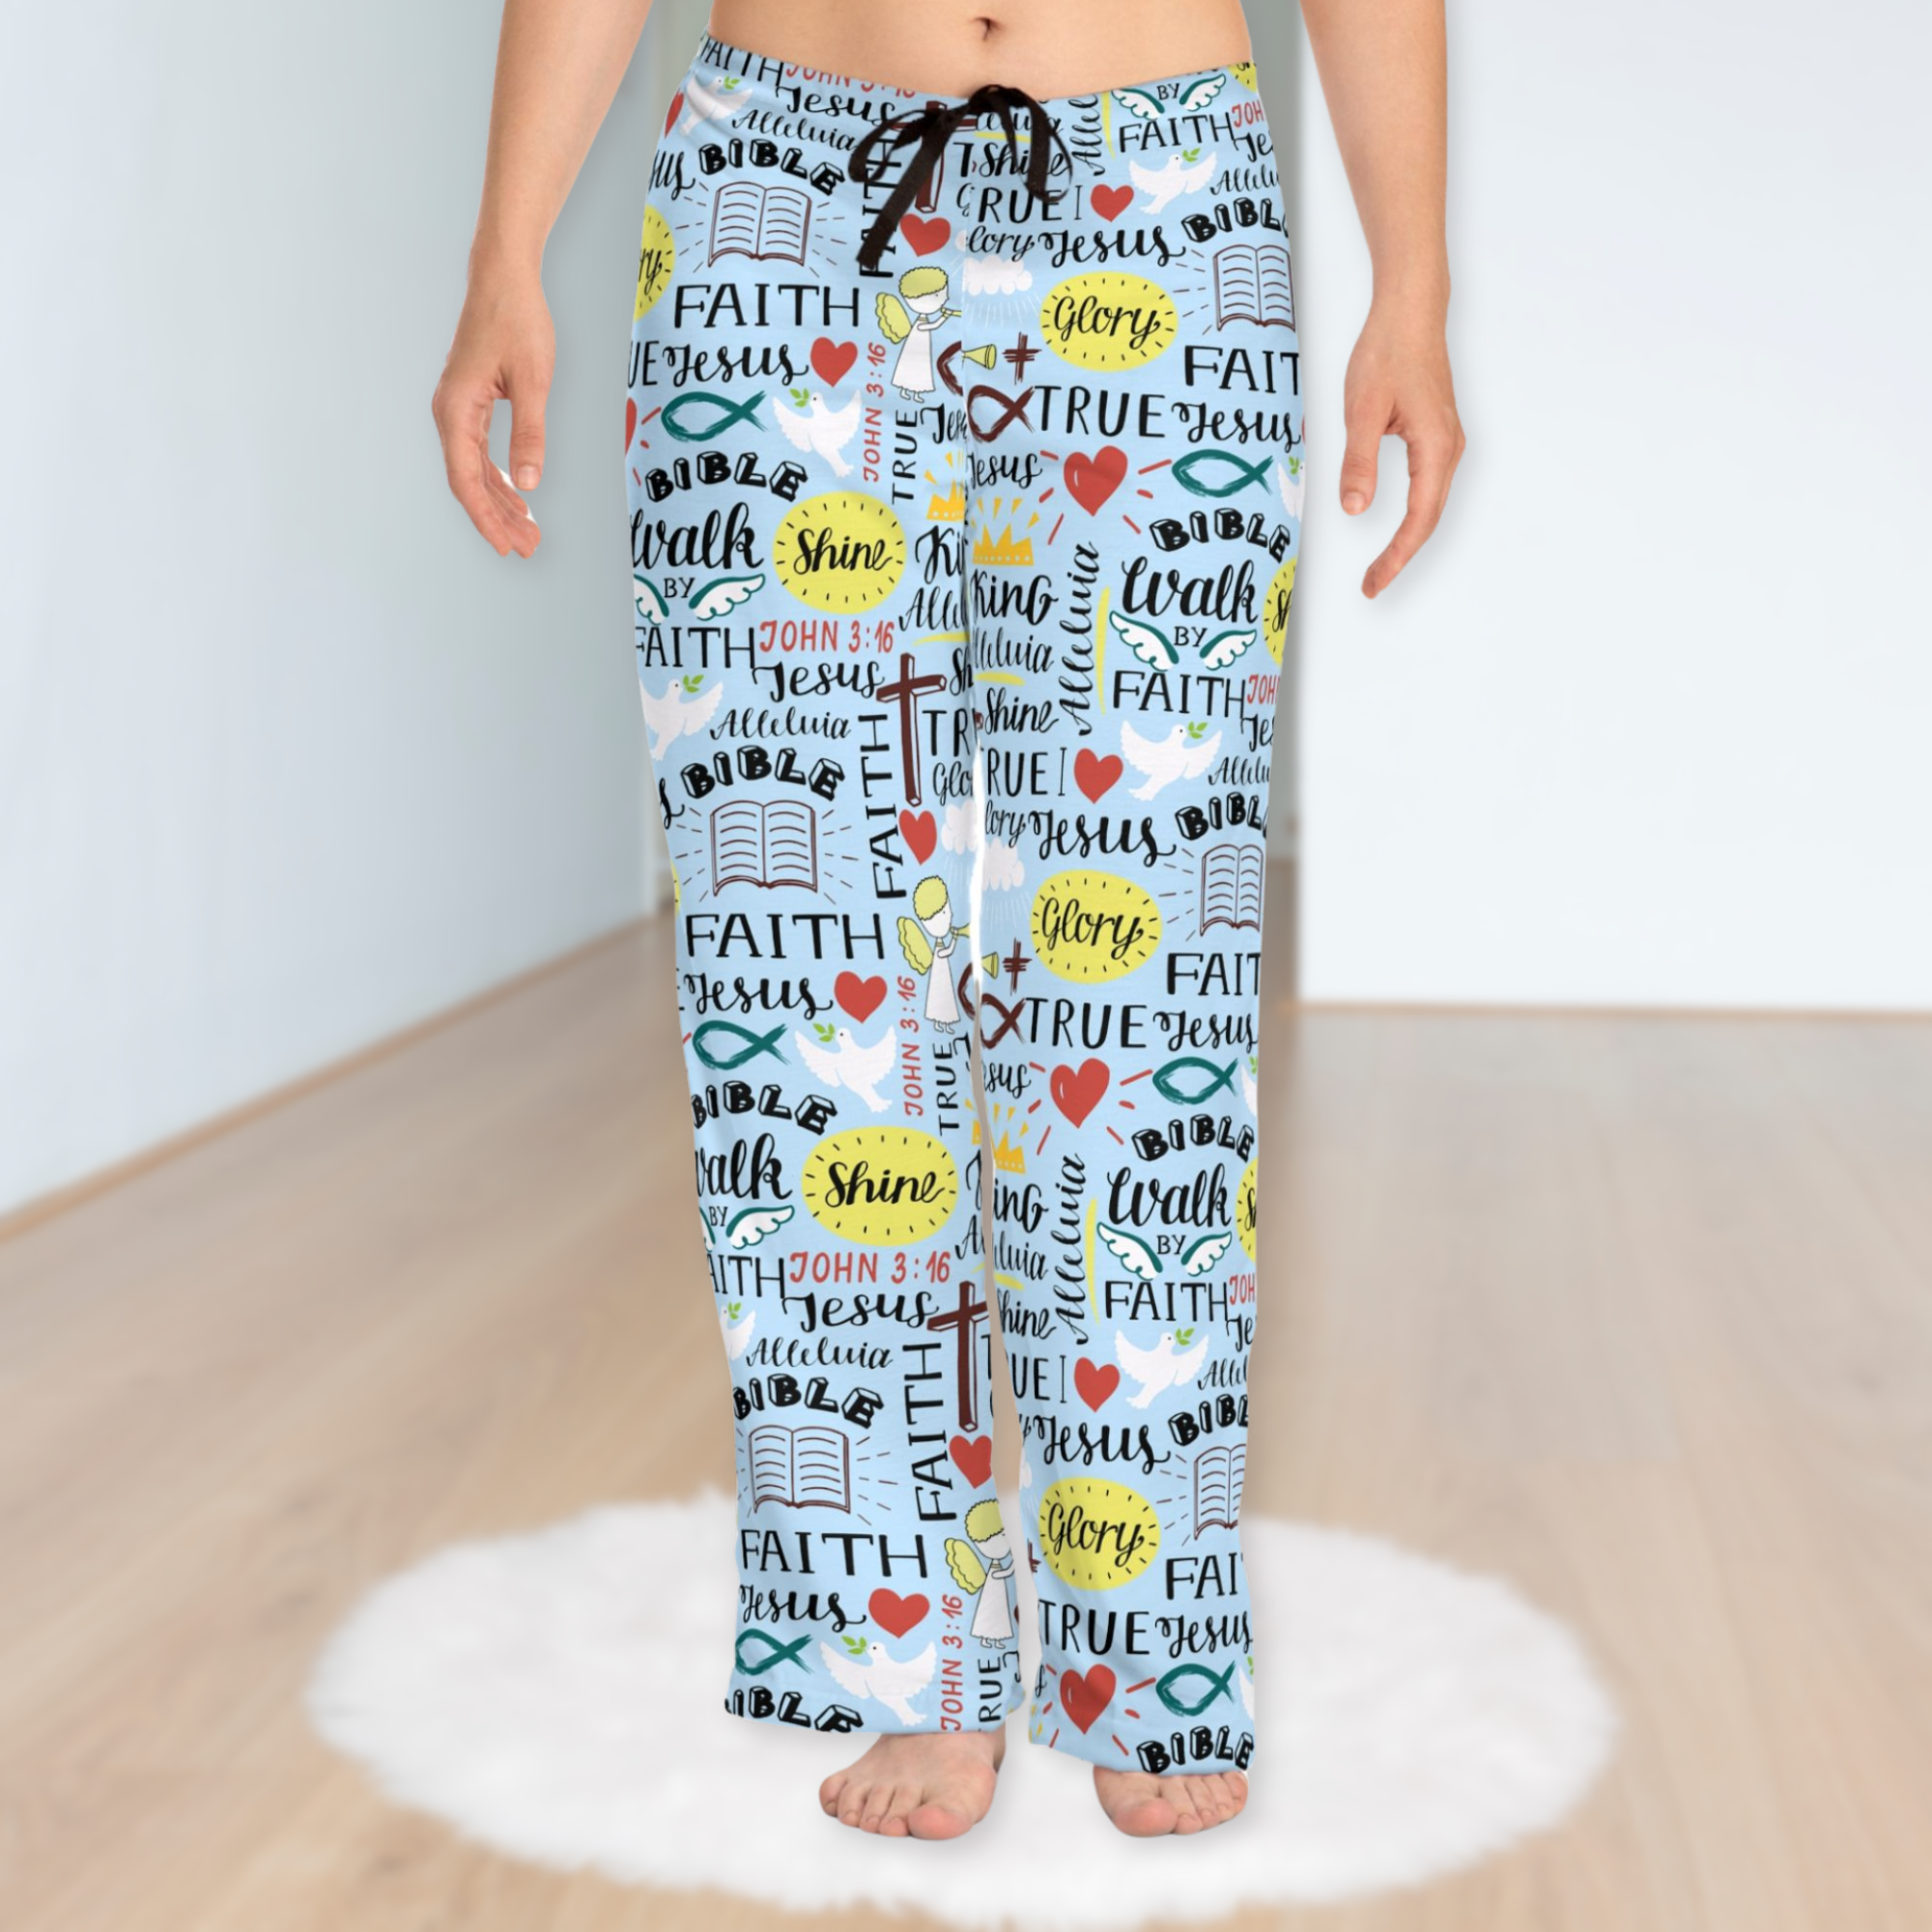 Angel Bedtime Affirmations Women's Sky Blue Lounge / Pajama Pants - Matching Pajama Set and Indoor Slippers Available